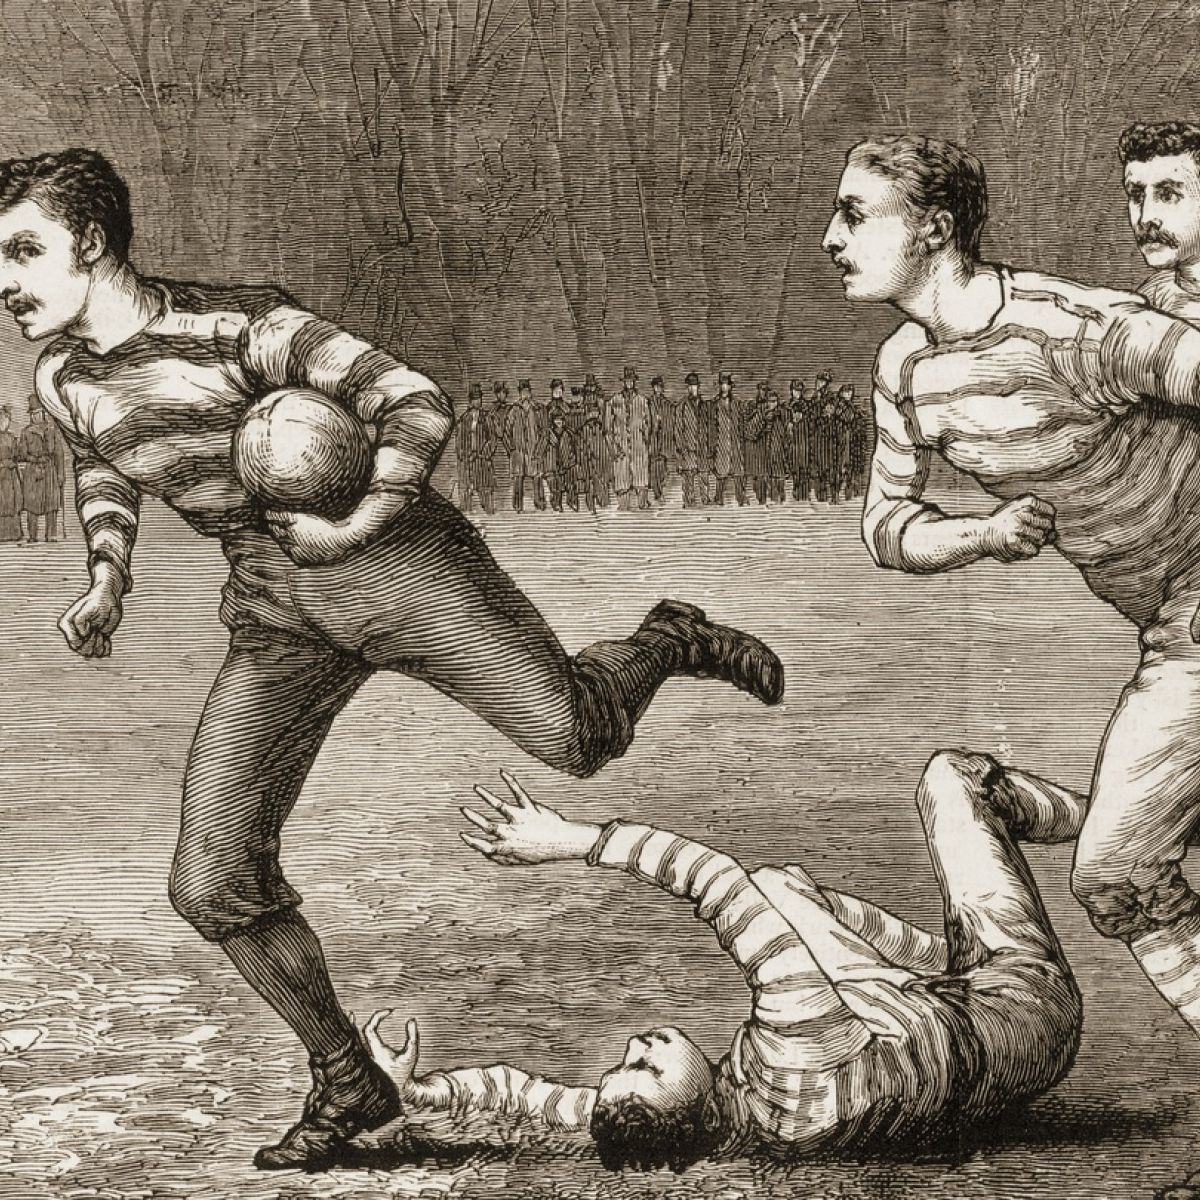 where does rugby originate from